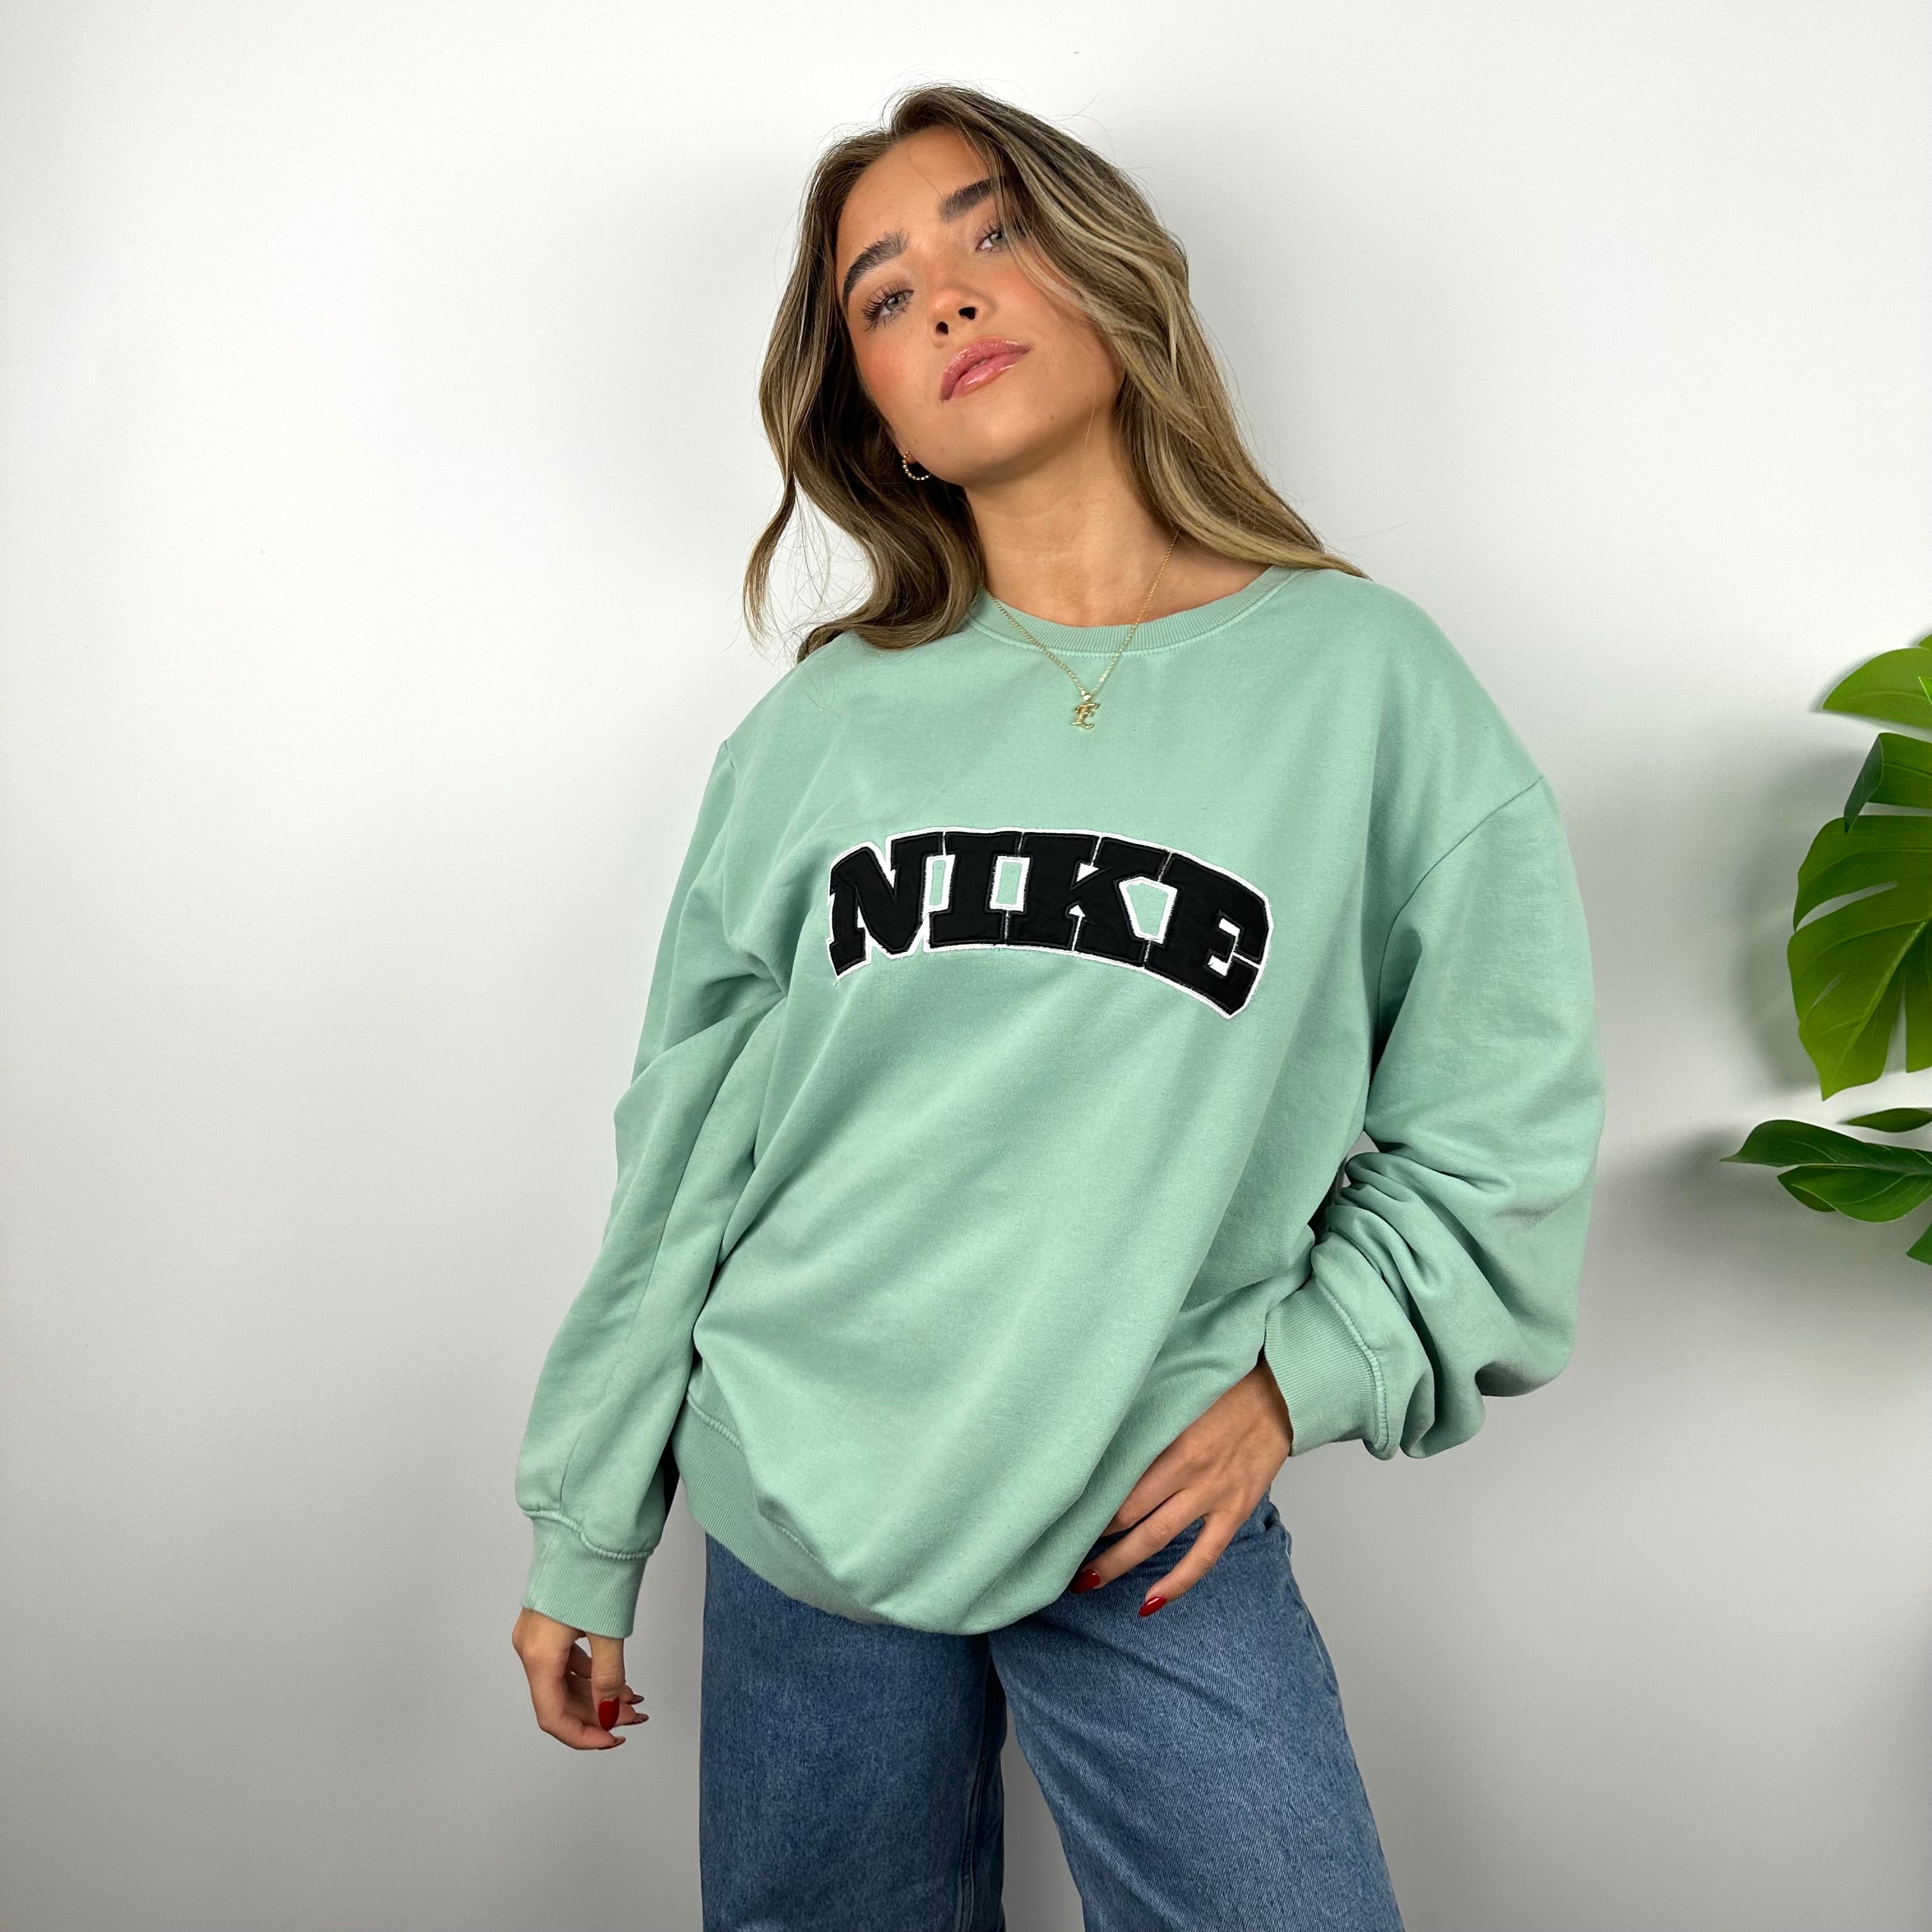 Nike Mint Green Embroidered Spell Out Sweatshirt (L)